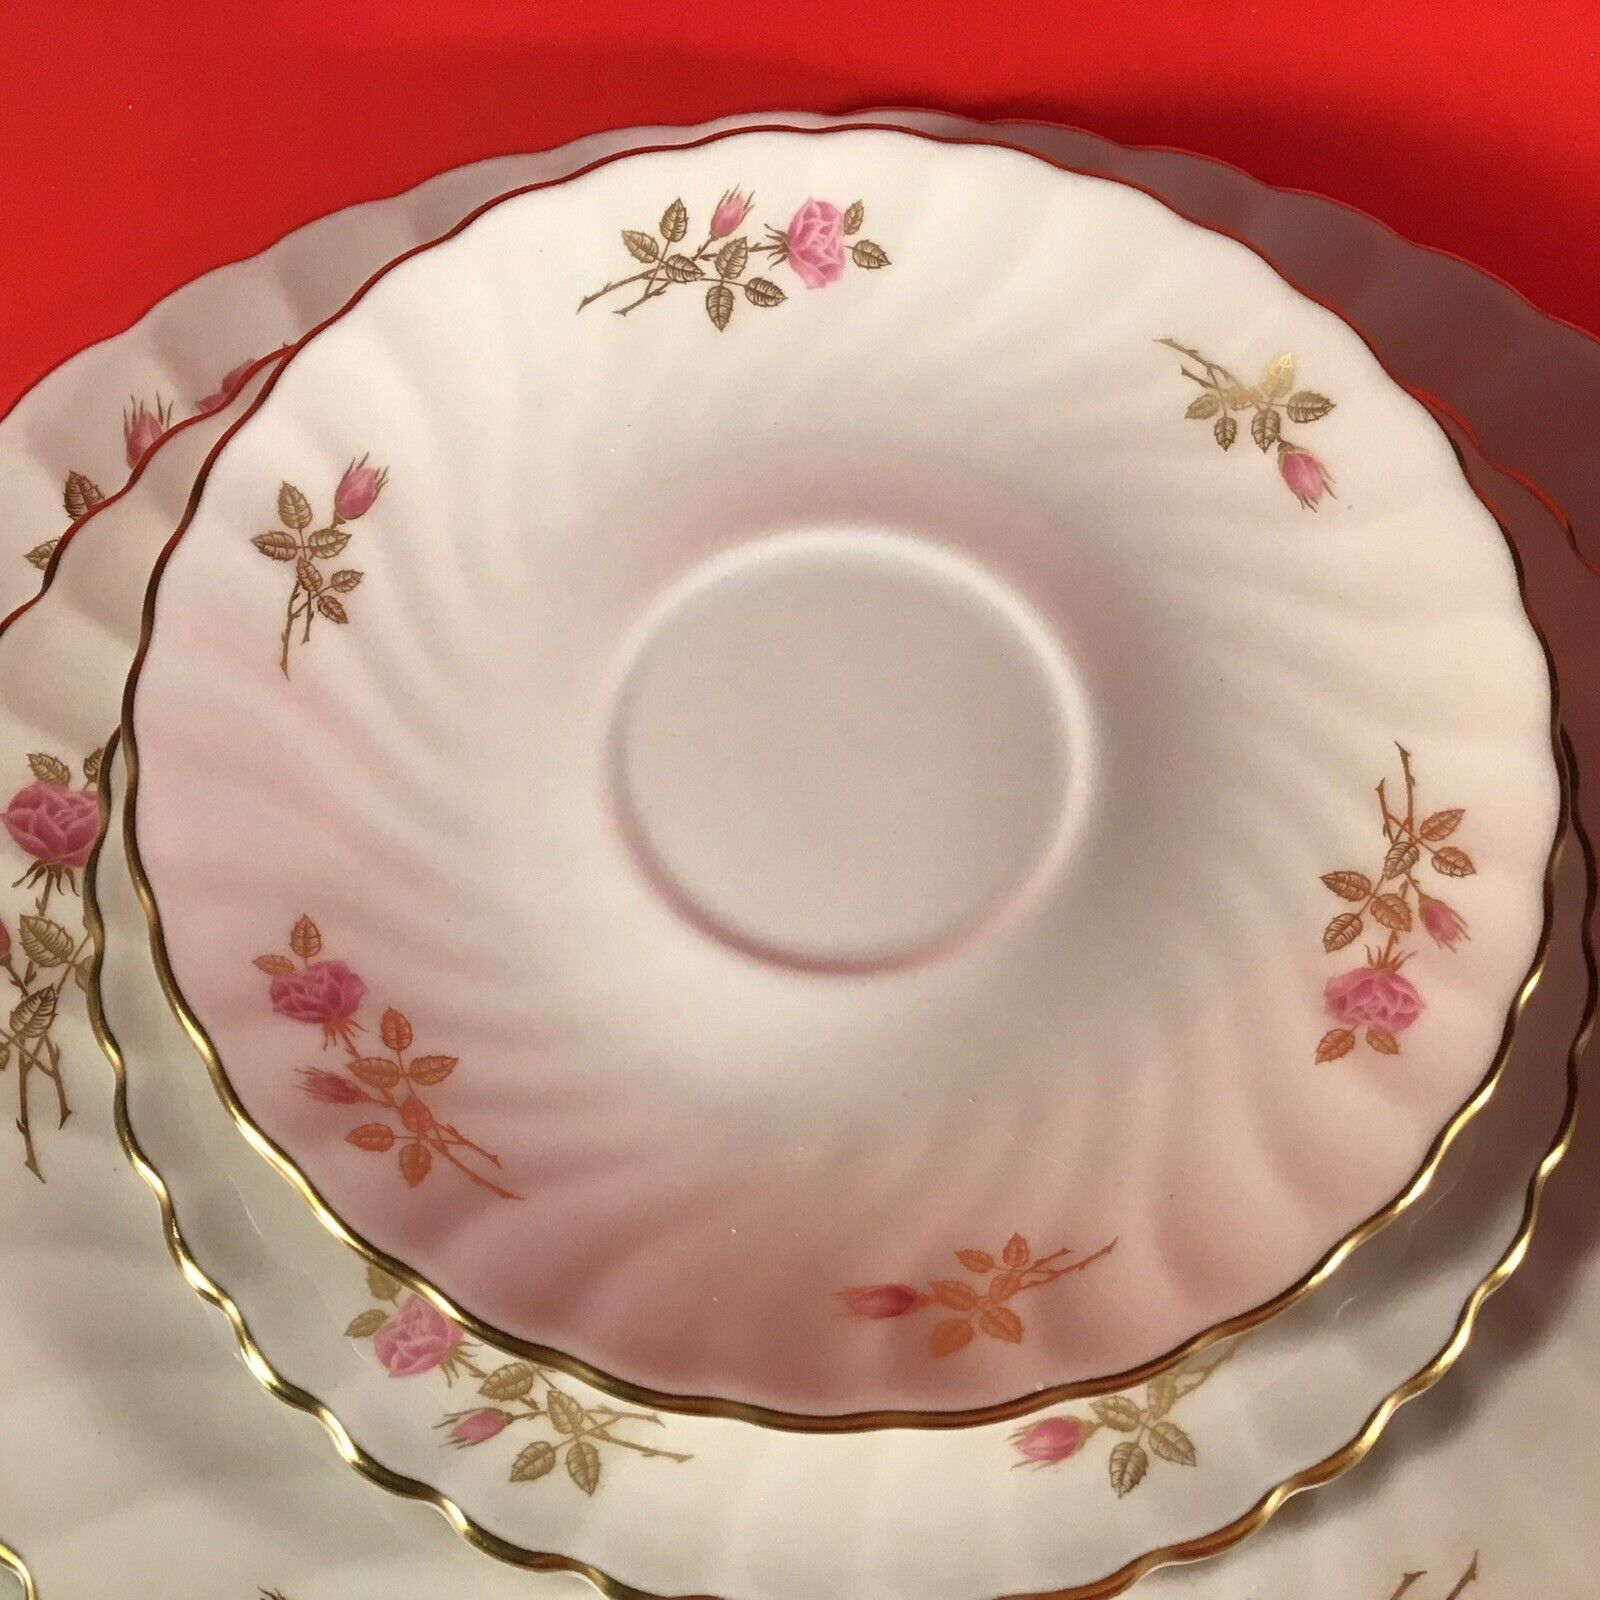 SYRACUSE CHINA COURTSHIP SILHOUETTE 5 PIECE PLACE SETTING PINK AND GOLD FLORAL syracuse china - фотография #4